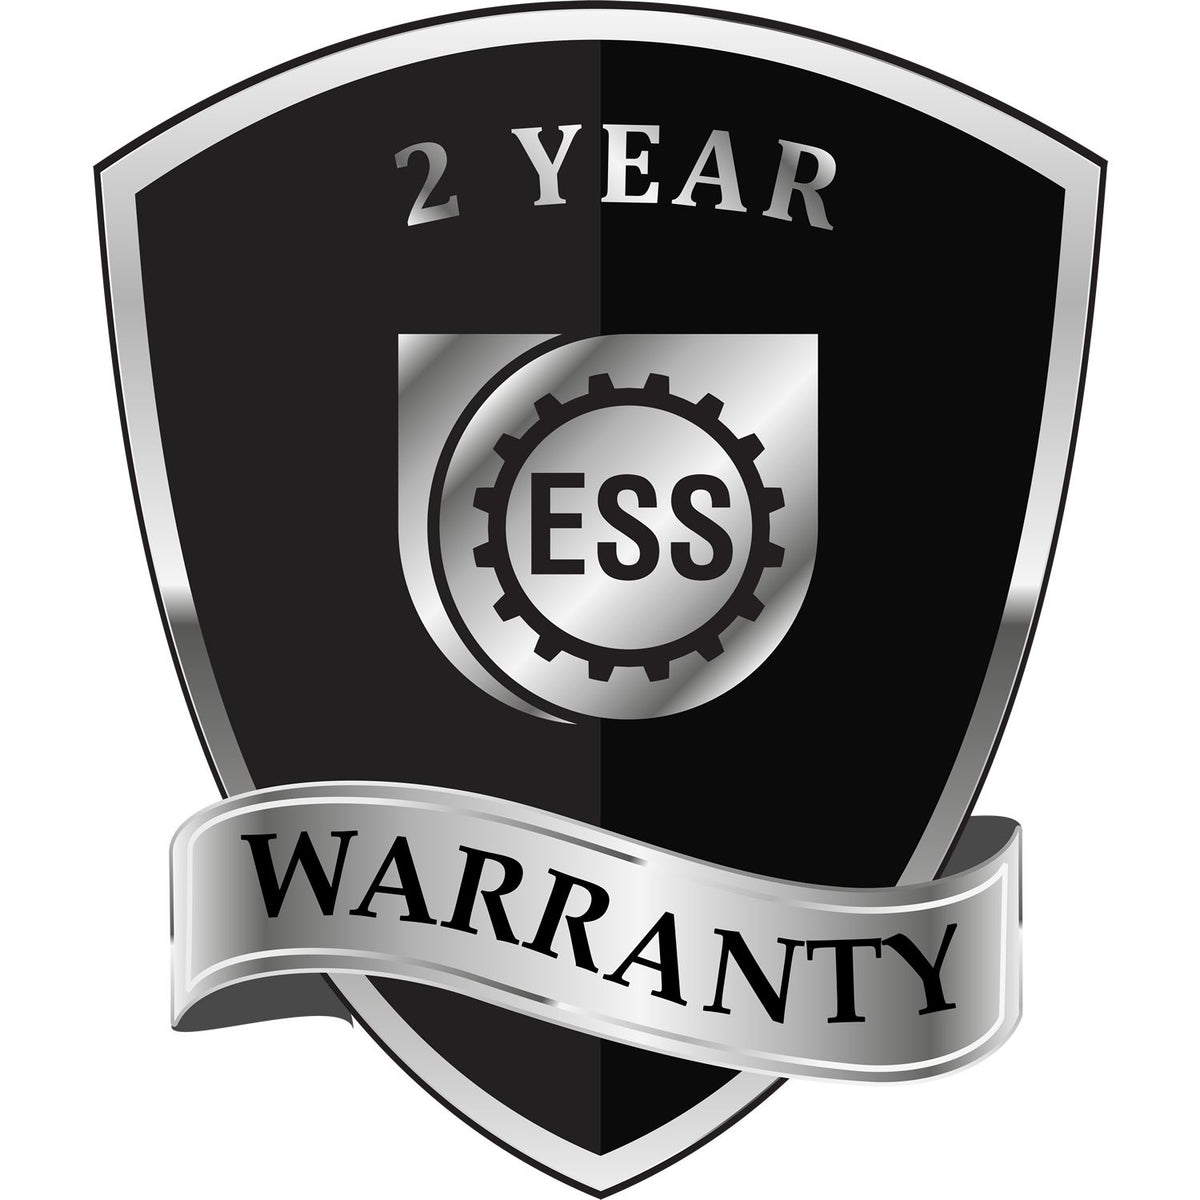 A badge or emblem showing a warranty icon for the Long Reach Florida PE Seal